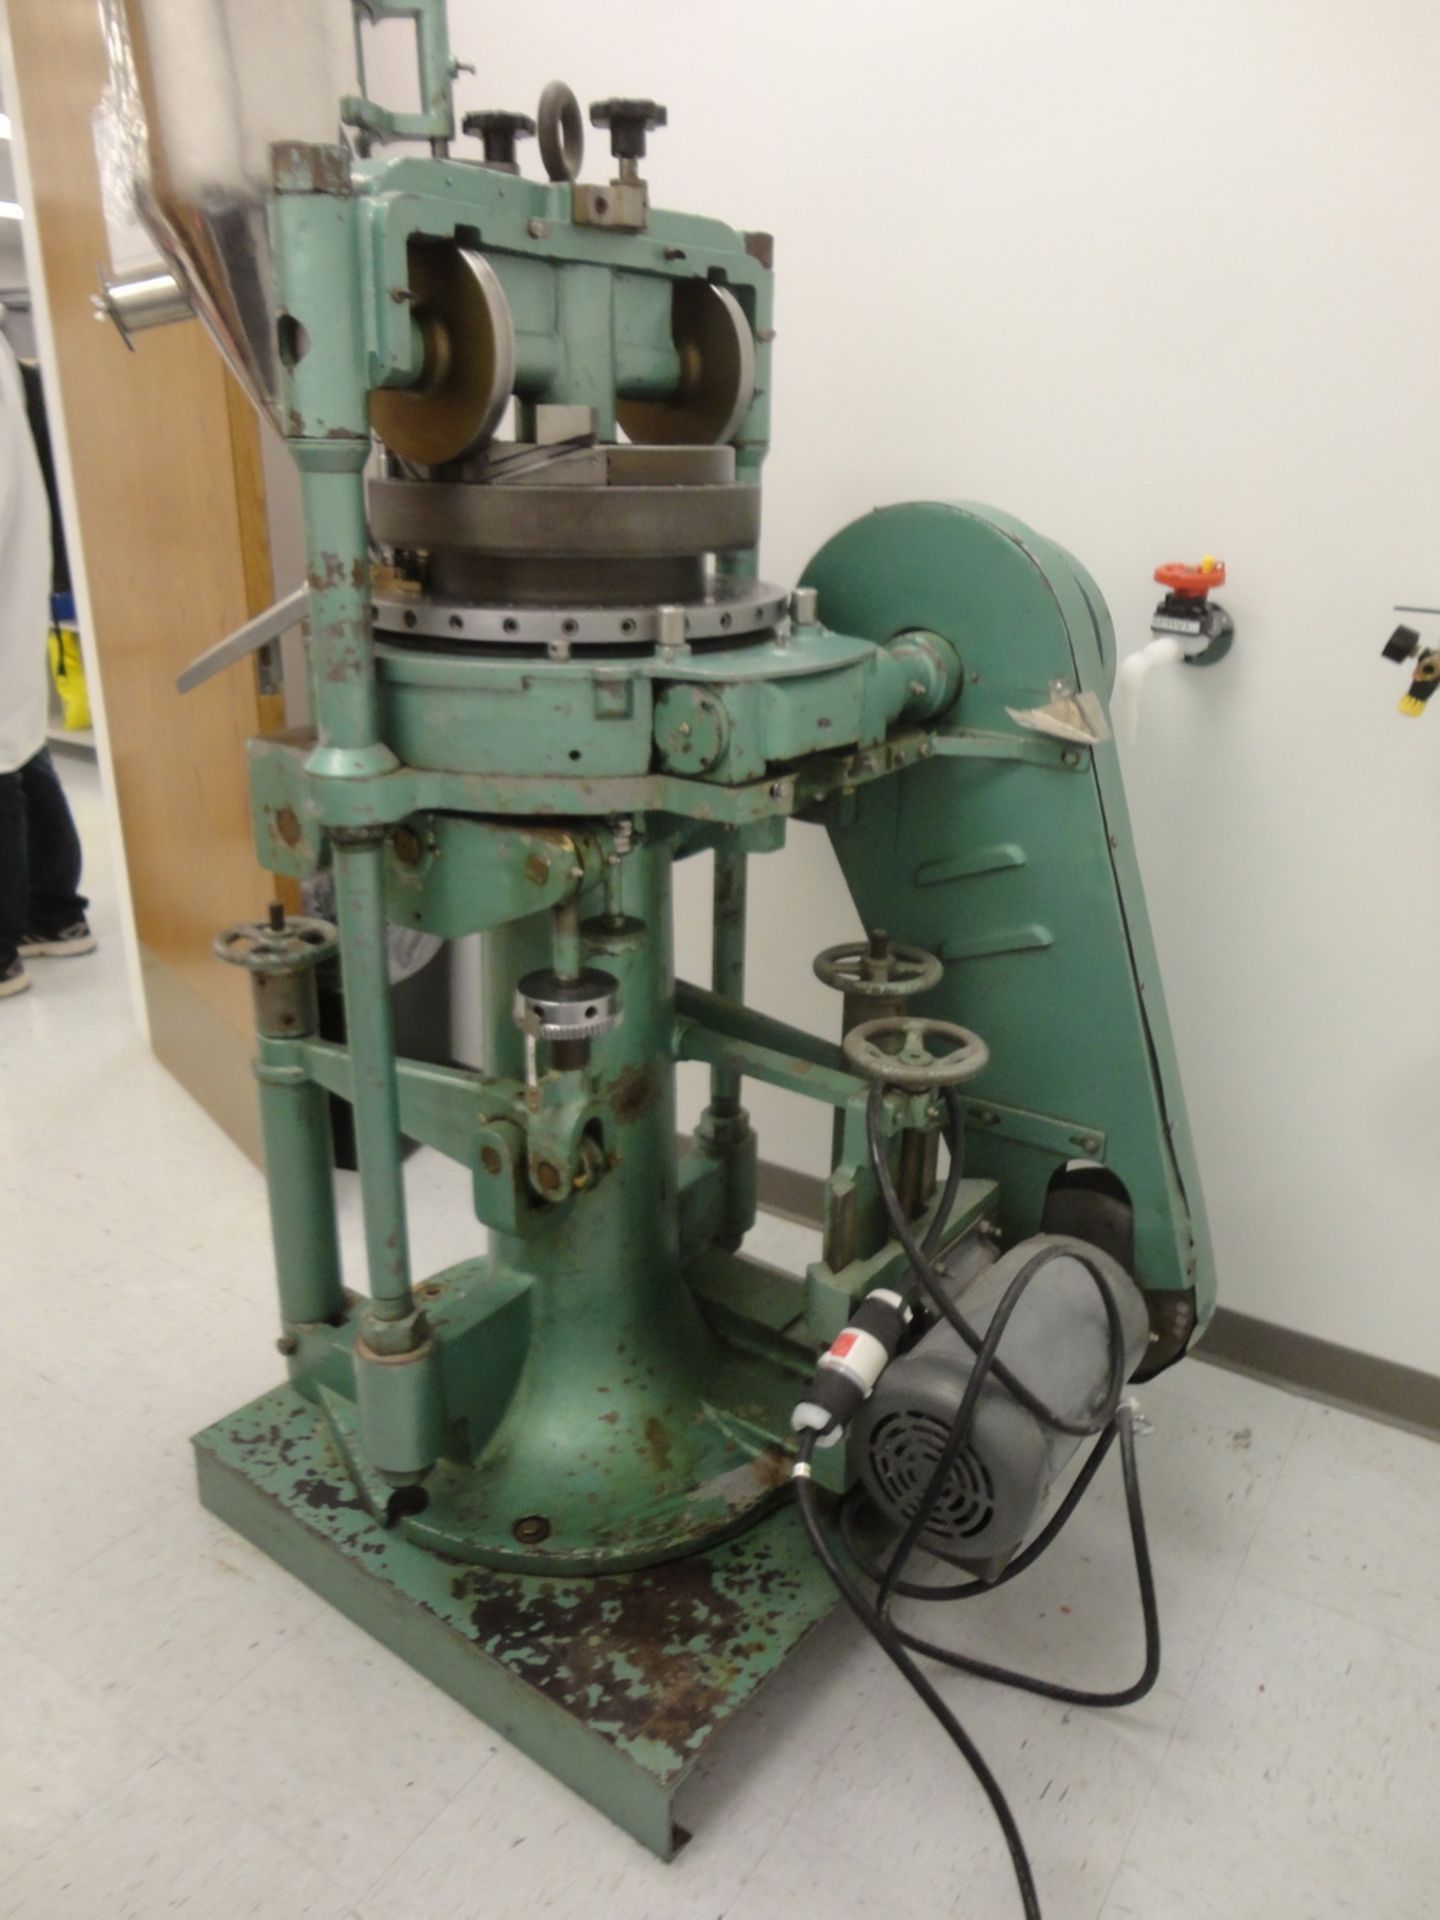 MANESTY DOUBLE SIDED ROTARY TABLET PRESS, MODEL BB3B, SERIAL NUMBER NA, WITH 27 STATION TURRET, B - Image 3 of 5